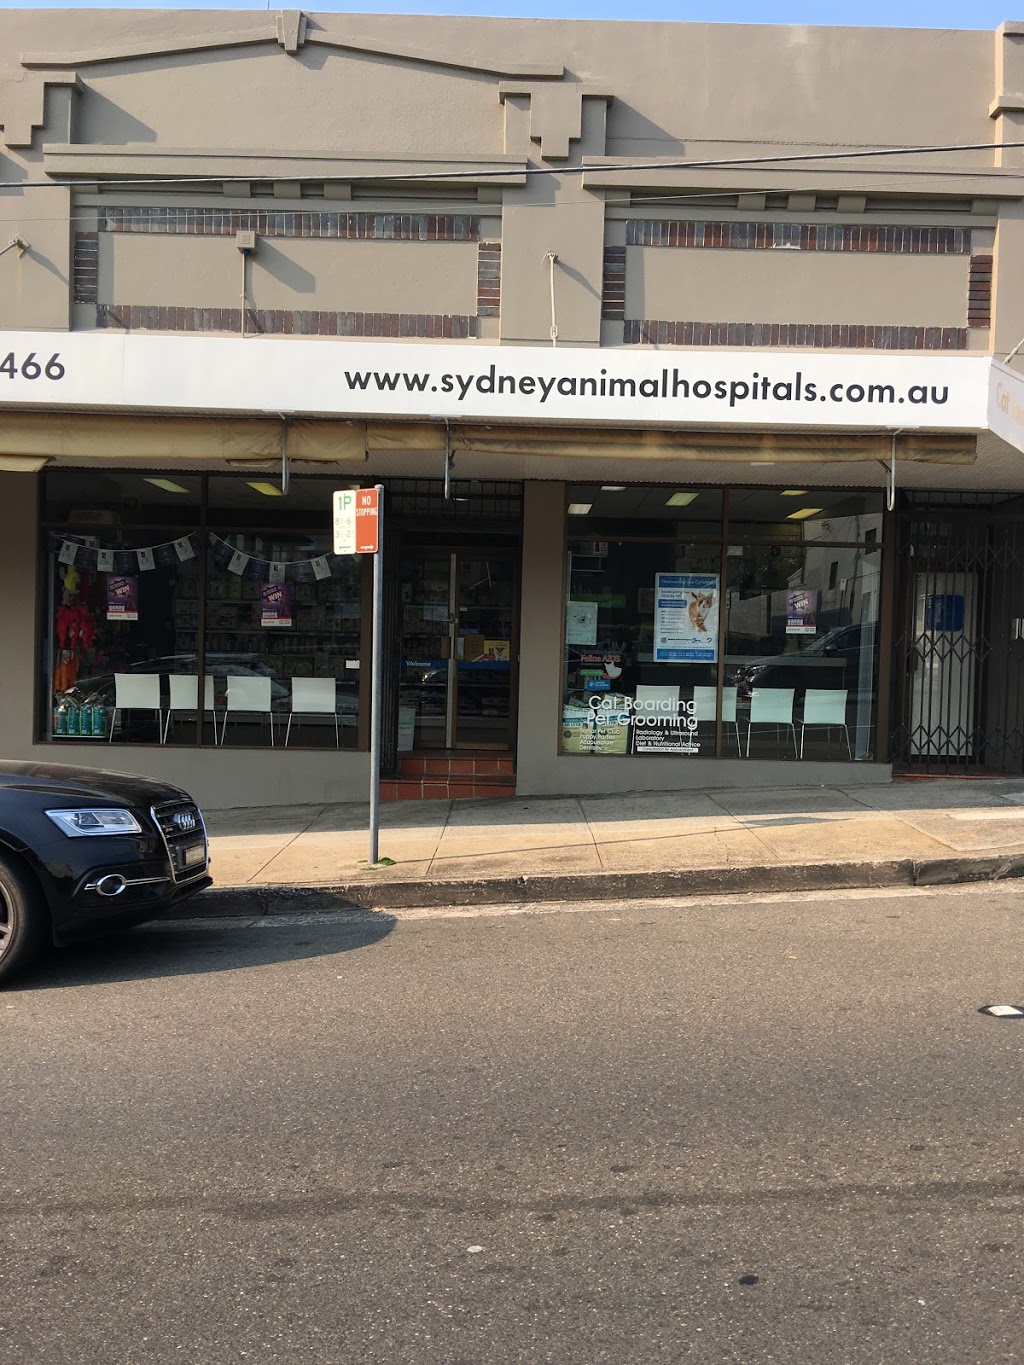 Sydney Animal Hospitals Inner West | 1A Northumberland Ave, Stanmore NSW 2048, Australia | Phone: (02) 9516 1466